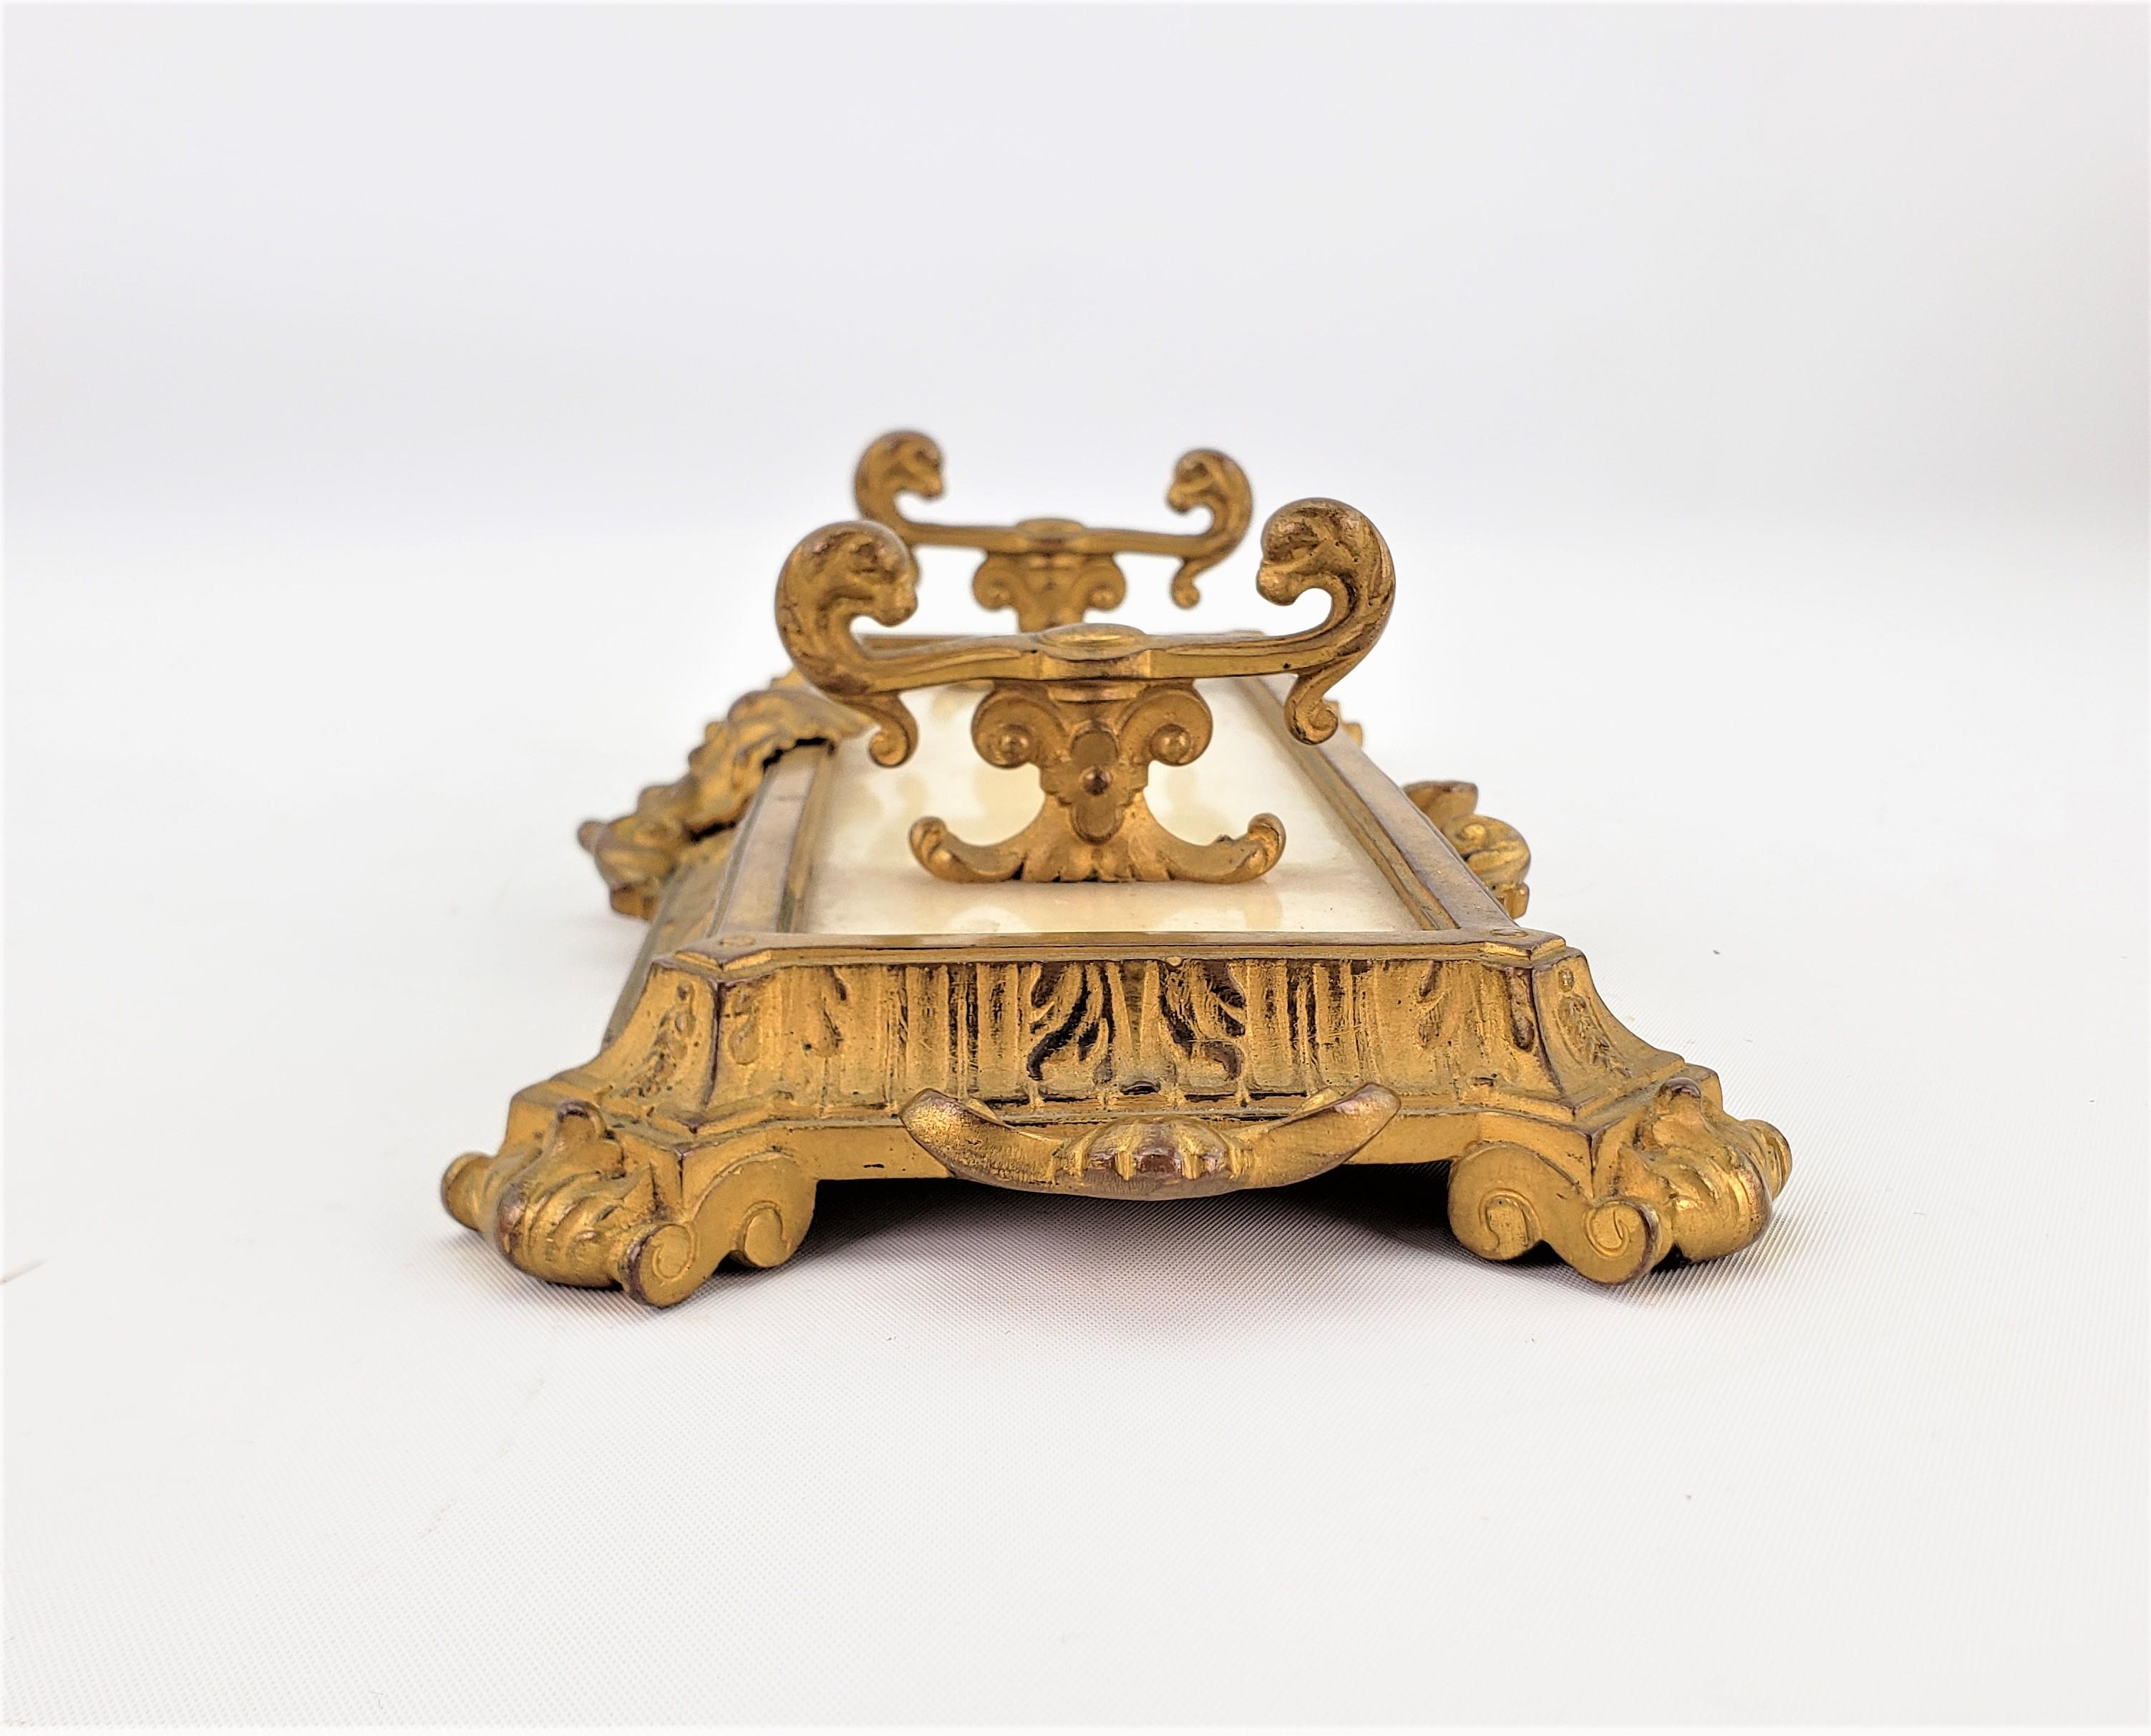 Antique Ornate Gilt Bronze Pen Rest or Holder with Onyx Base & Floral Decoration In Good Condition For Sale In Hamilton, Ontario